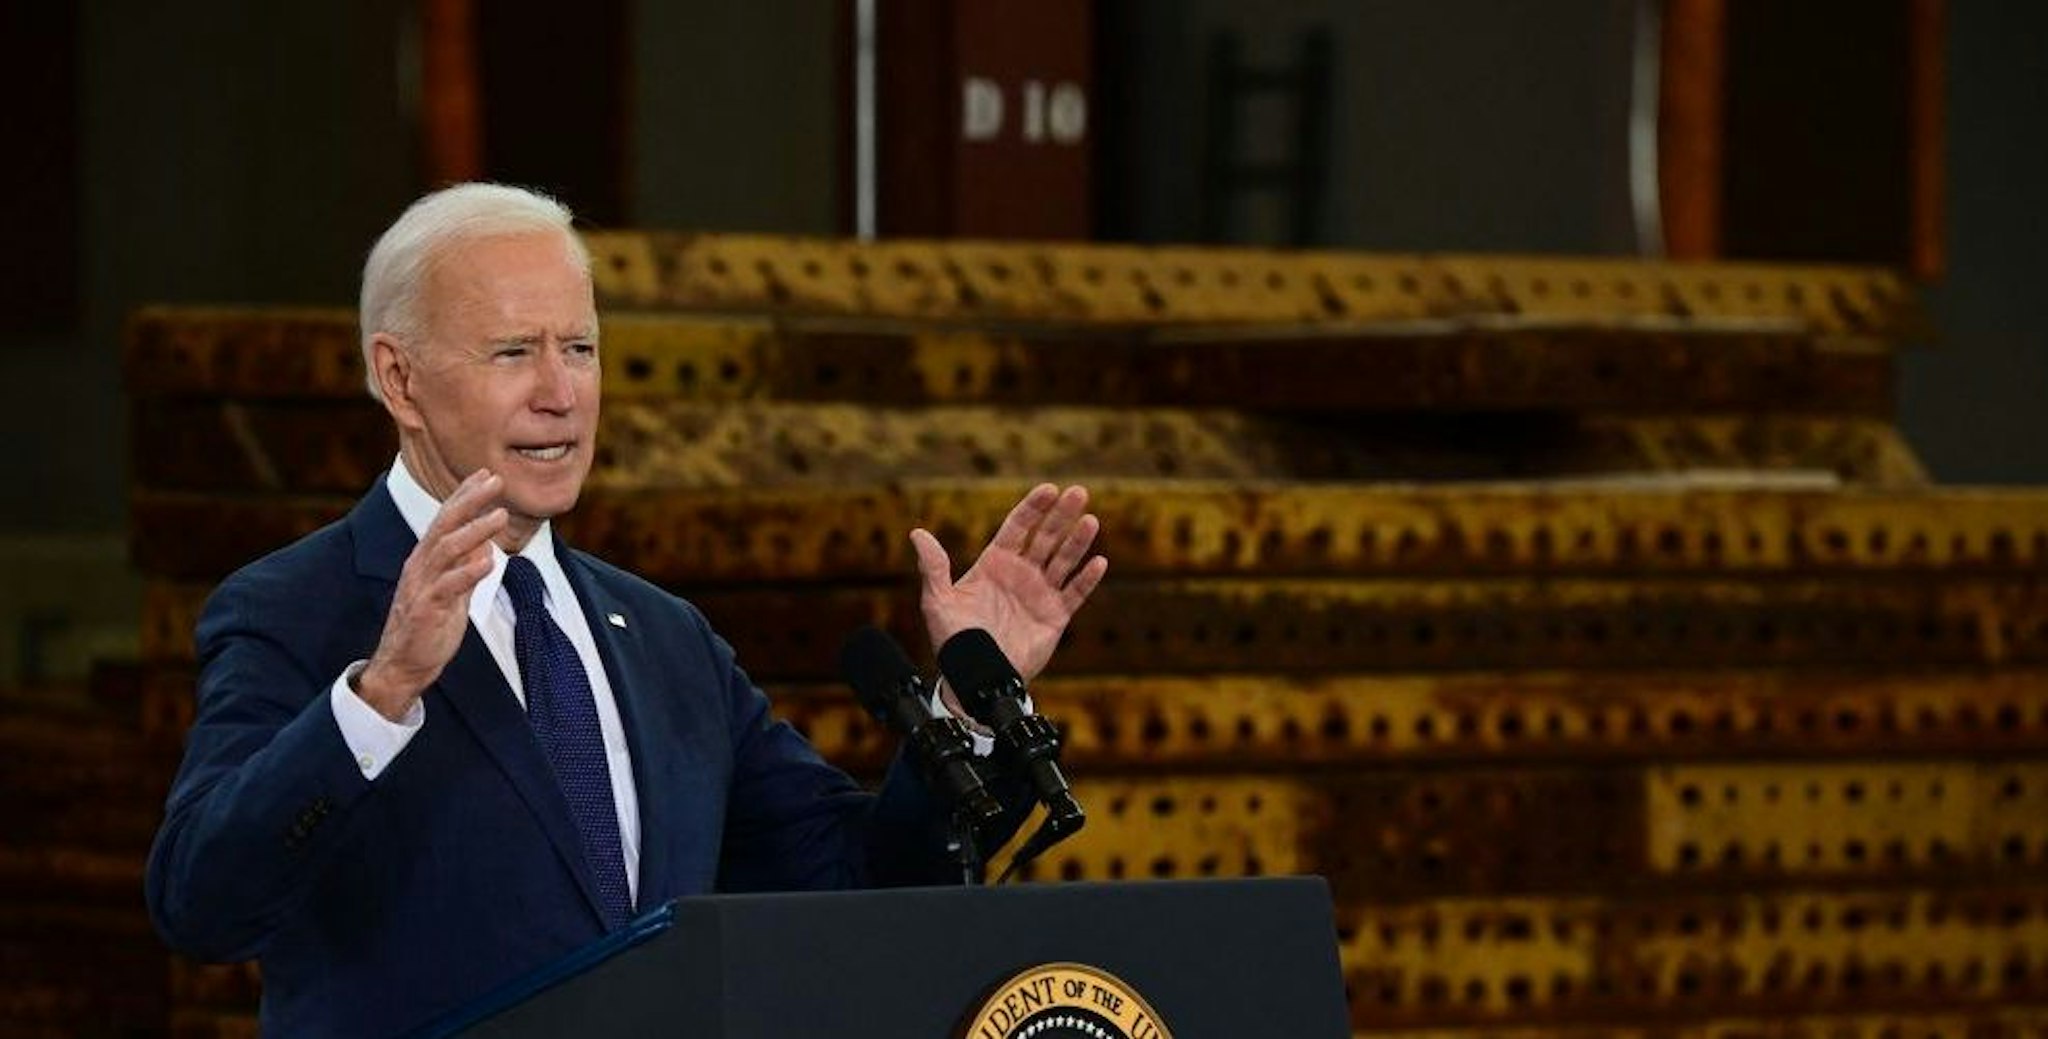 US President Joe Biden speaks in Pittsburgh, Pennsylvania, on March 31, 2021. - President Biden will unveil in Pittsburgh a $2 trillion infrastructure plan aimed at modernizing the United States' crumbling transport network, creating millions of jobs and enabling the country to "out-compete" China